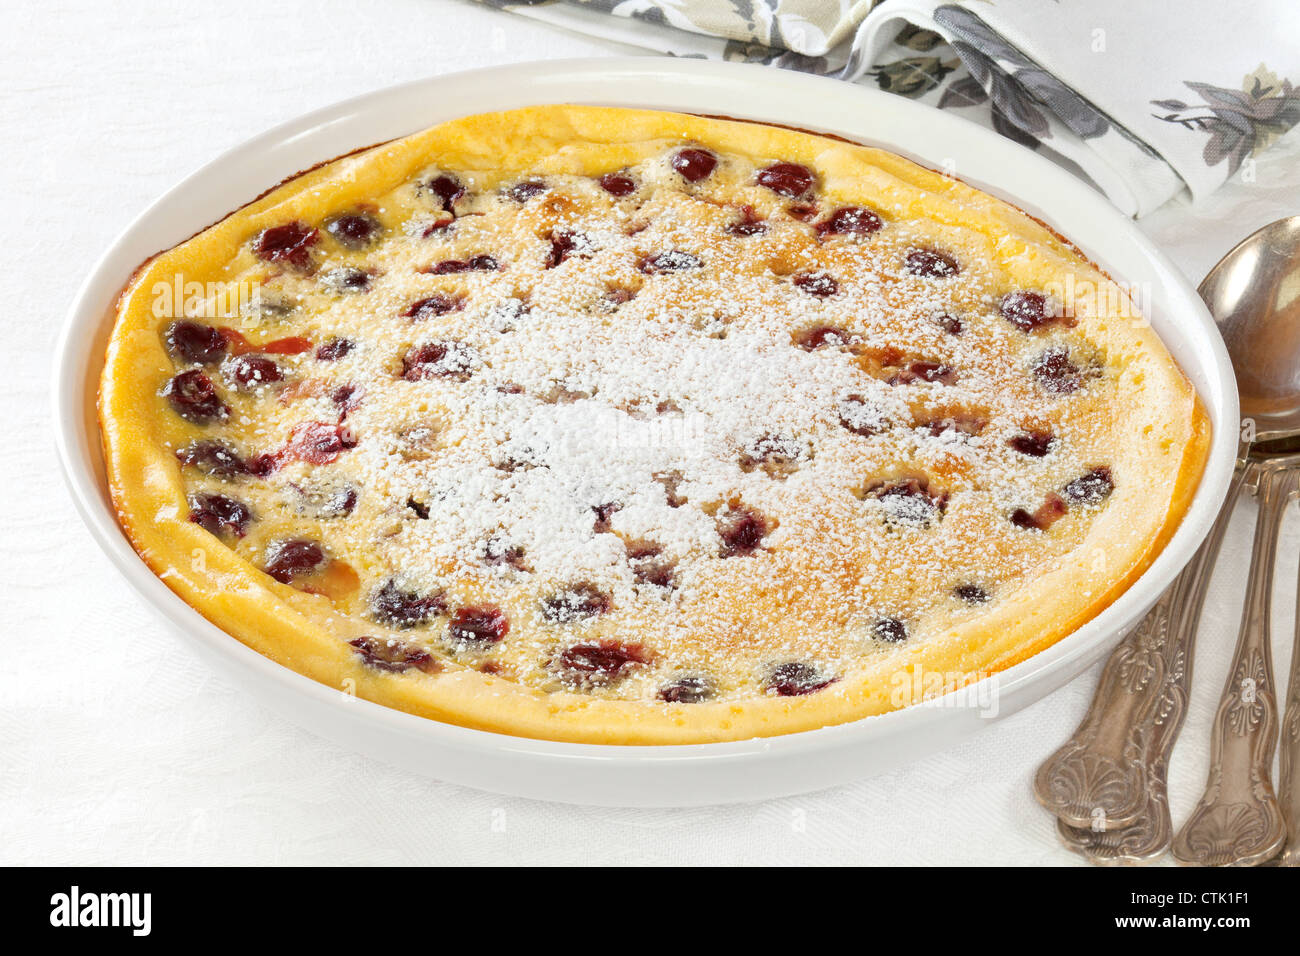 Popular French dessert Cherry Clafoutis, a baked batter pudding with morello cherries, sprinkled with icing sugar. Stock Photo